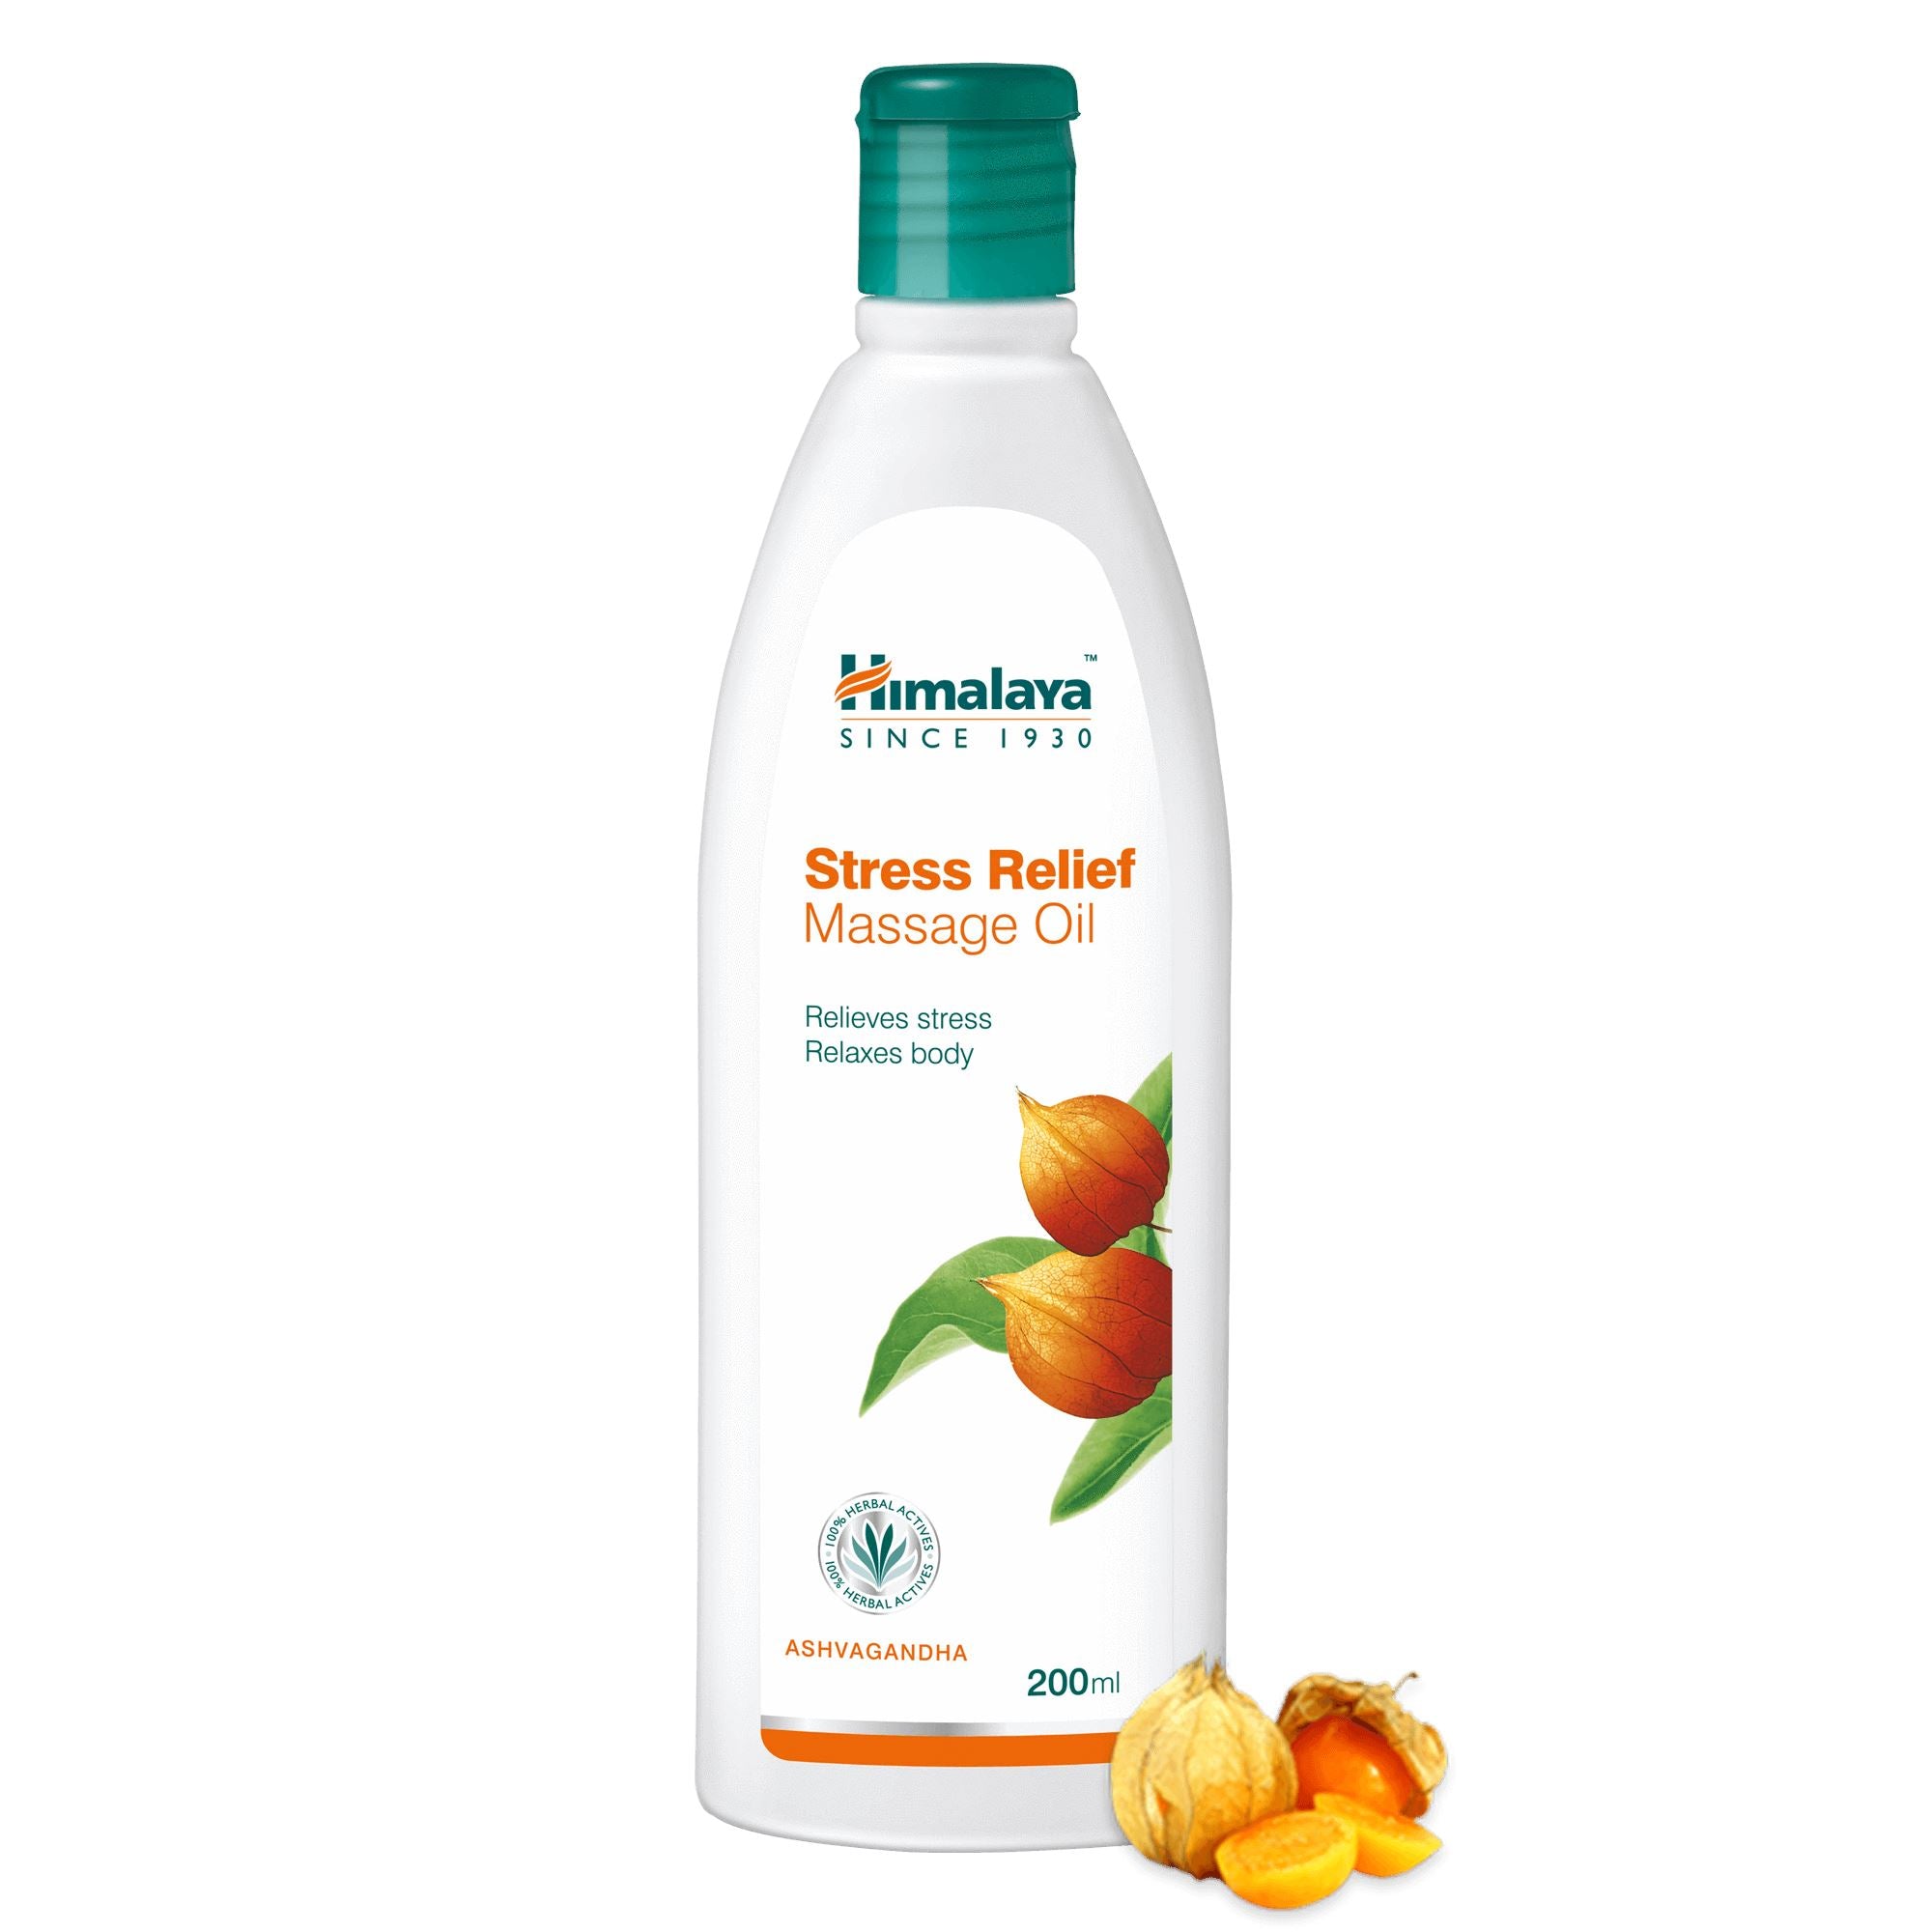 Himalaya Stress Relief Massage Oil - Relieves Stress Relaxes body